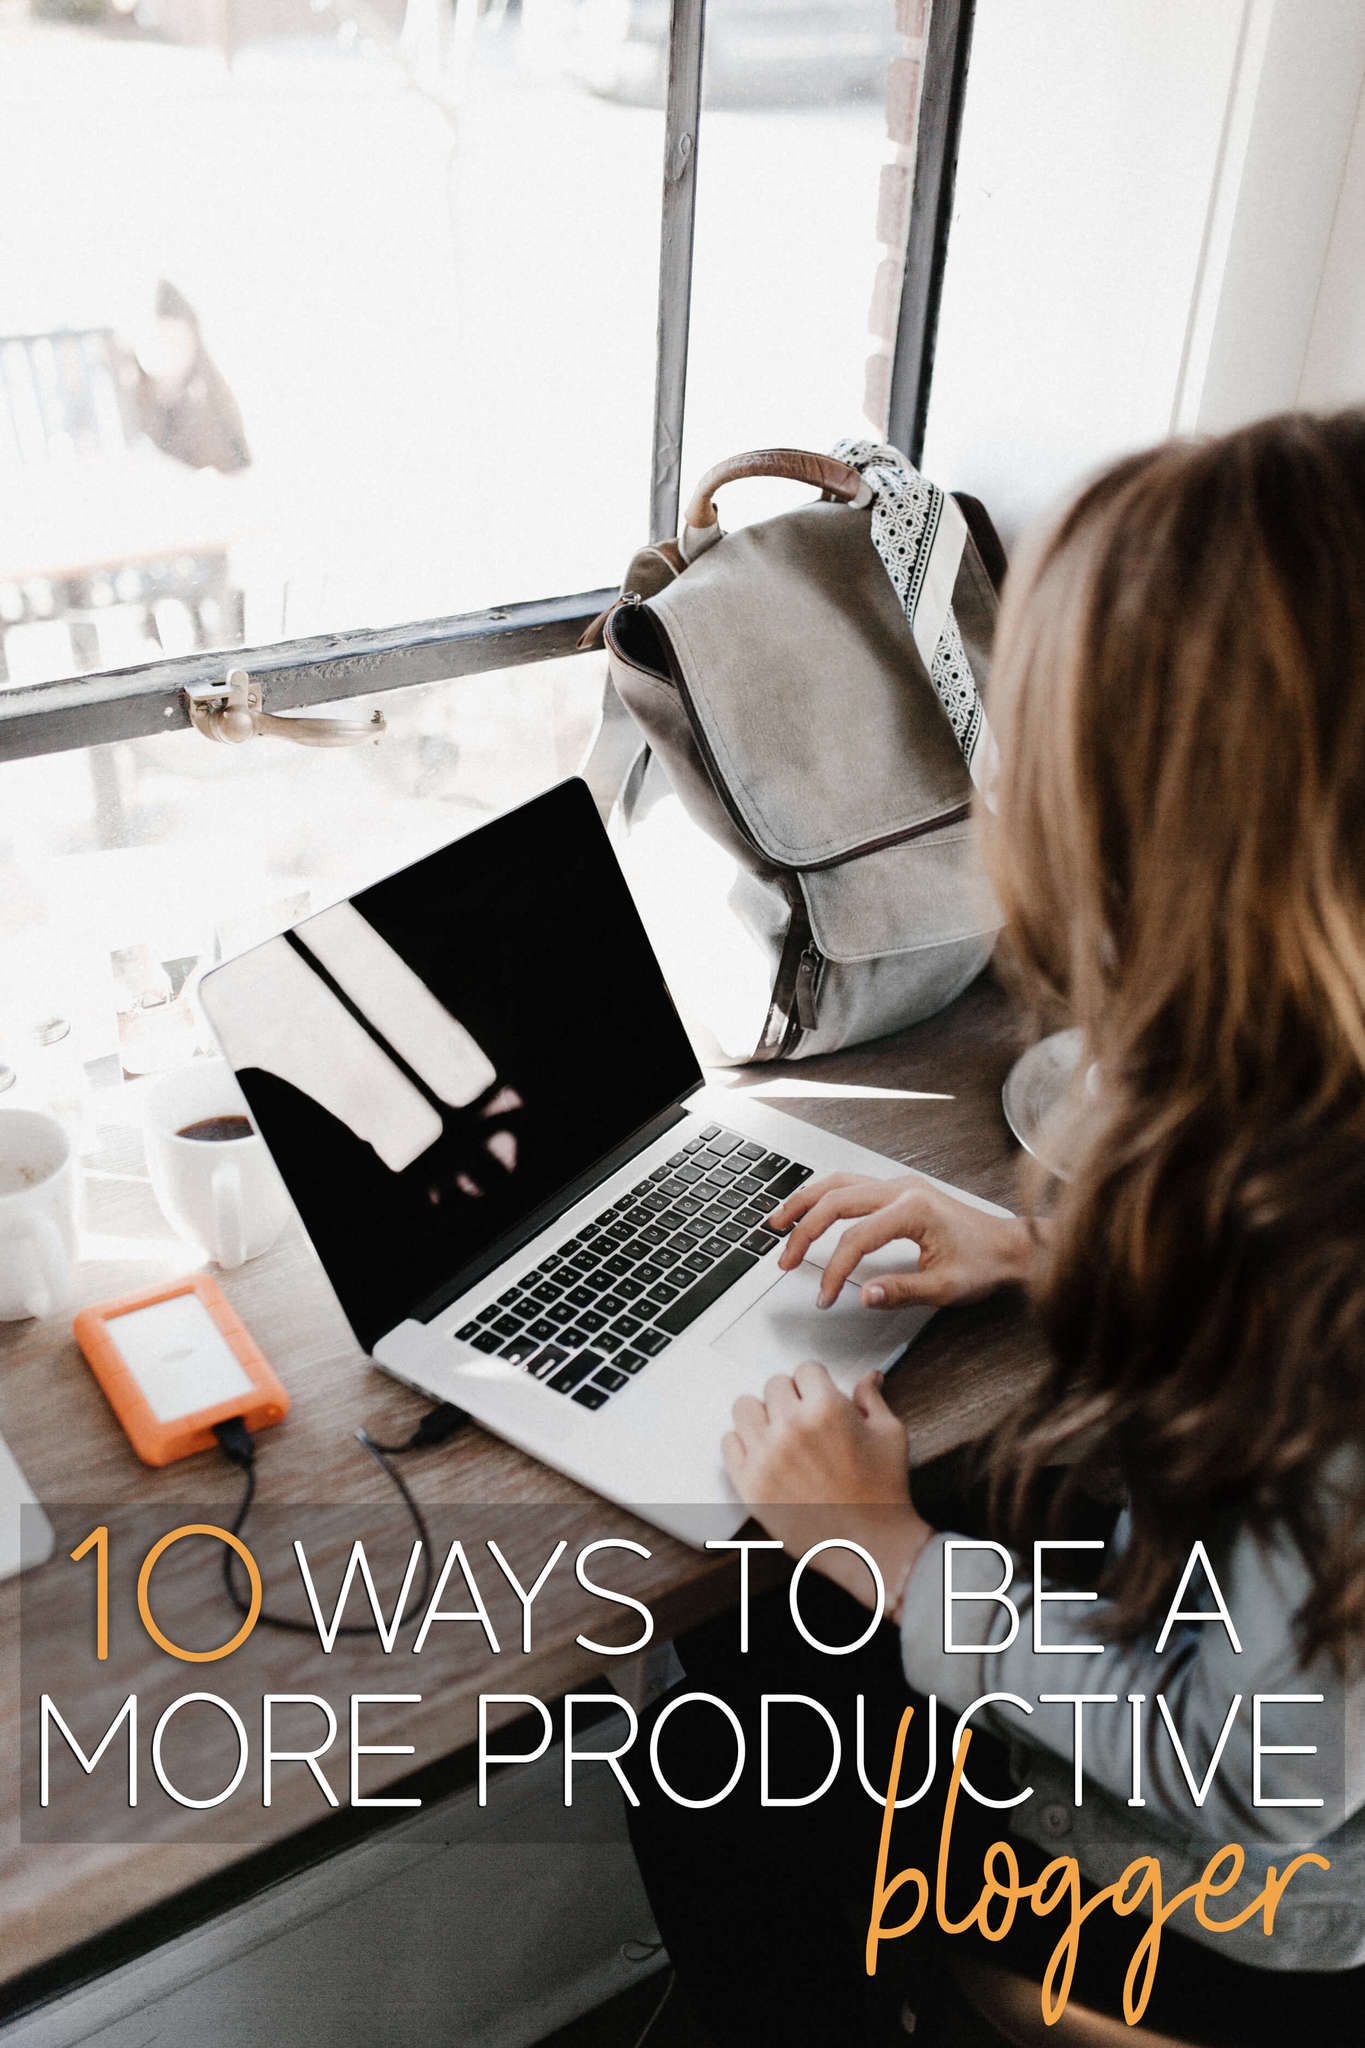 10 Ways to Be a More Productive Blogger